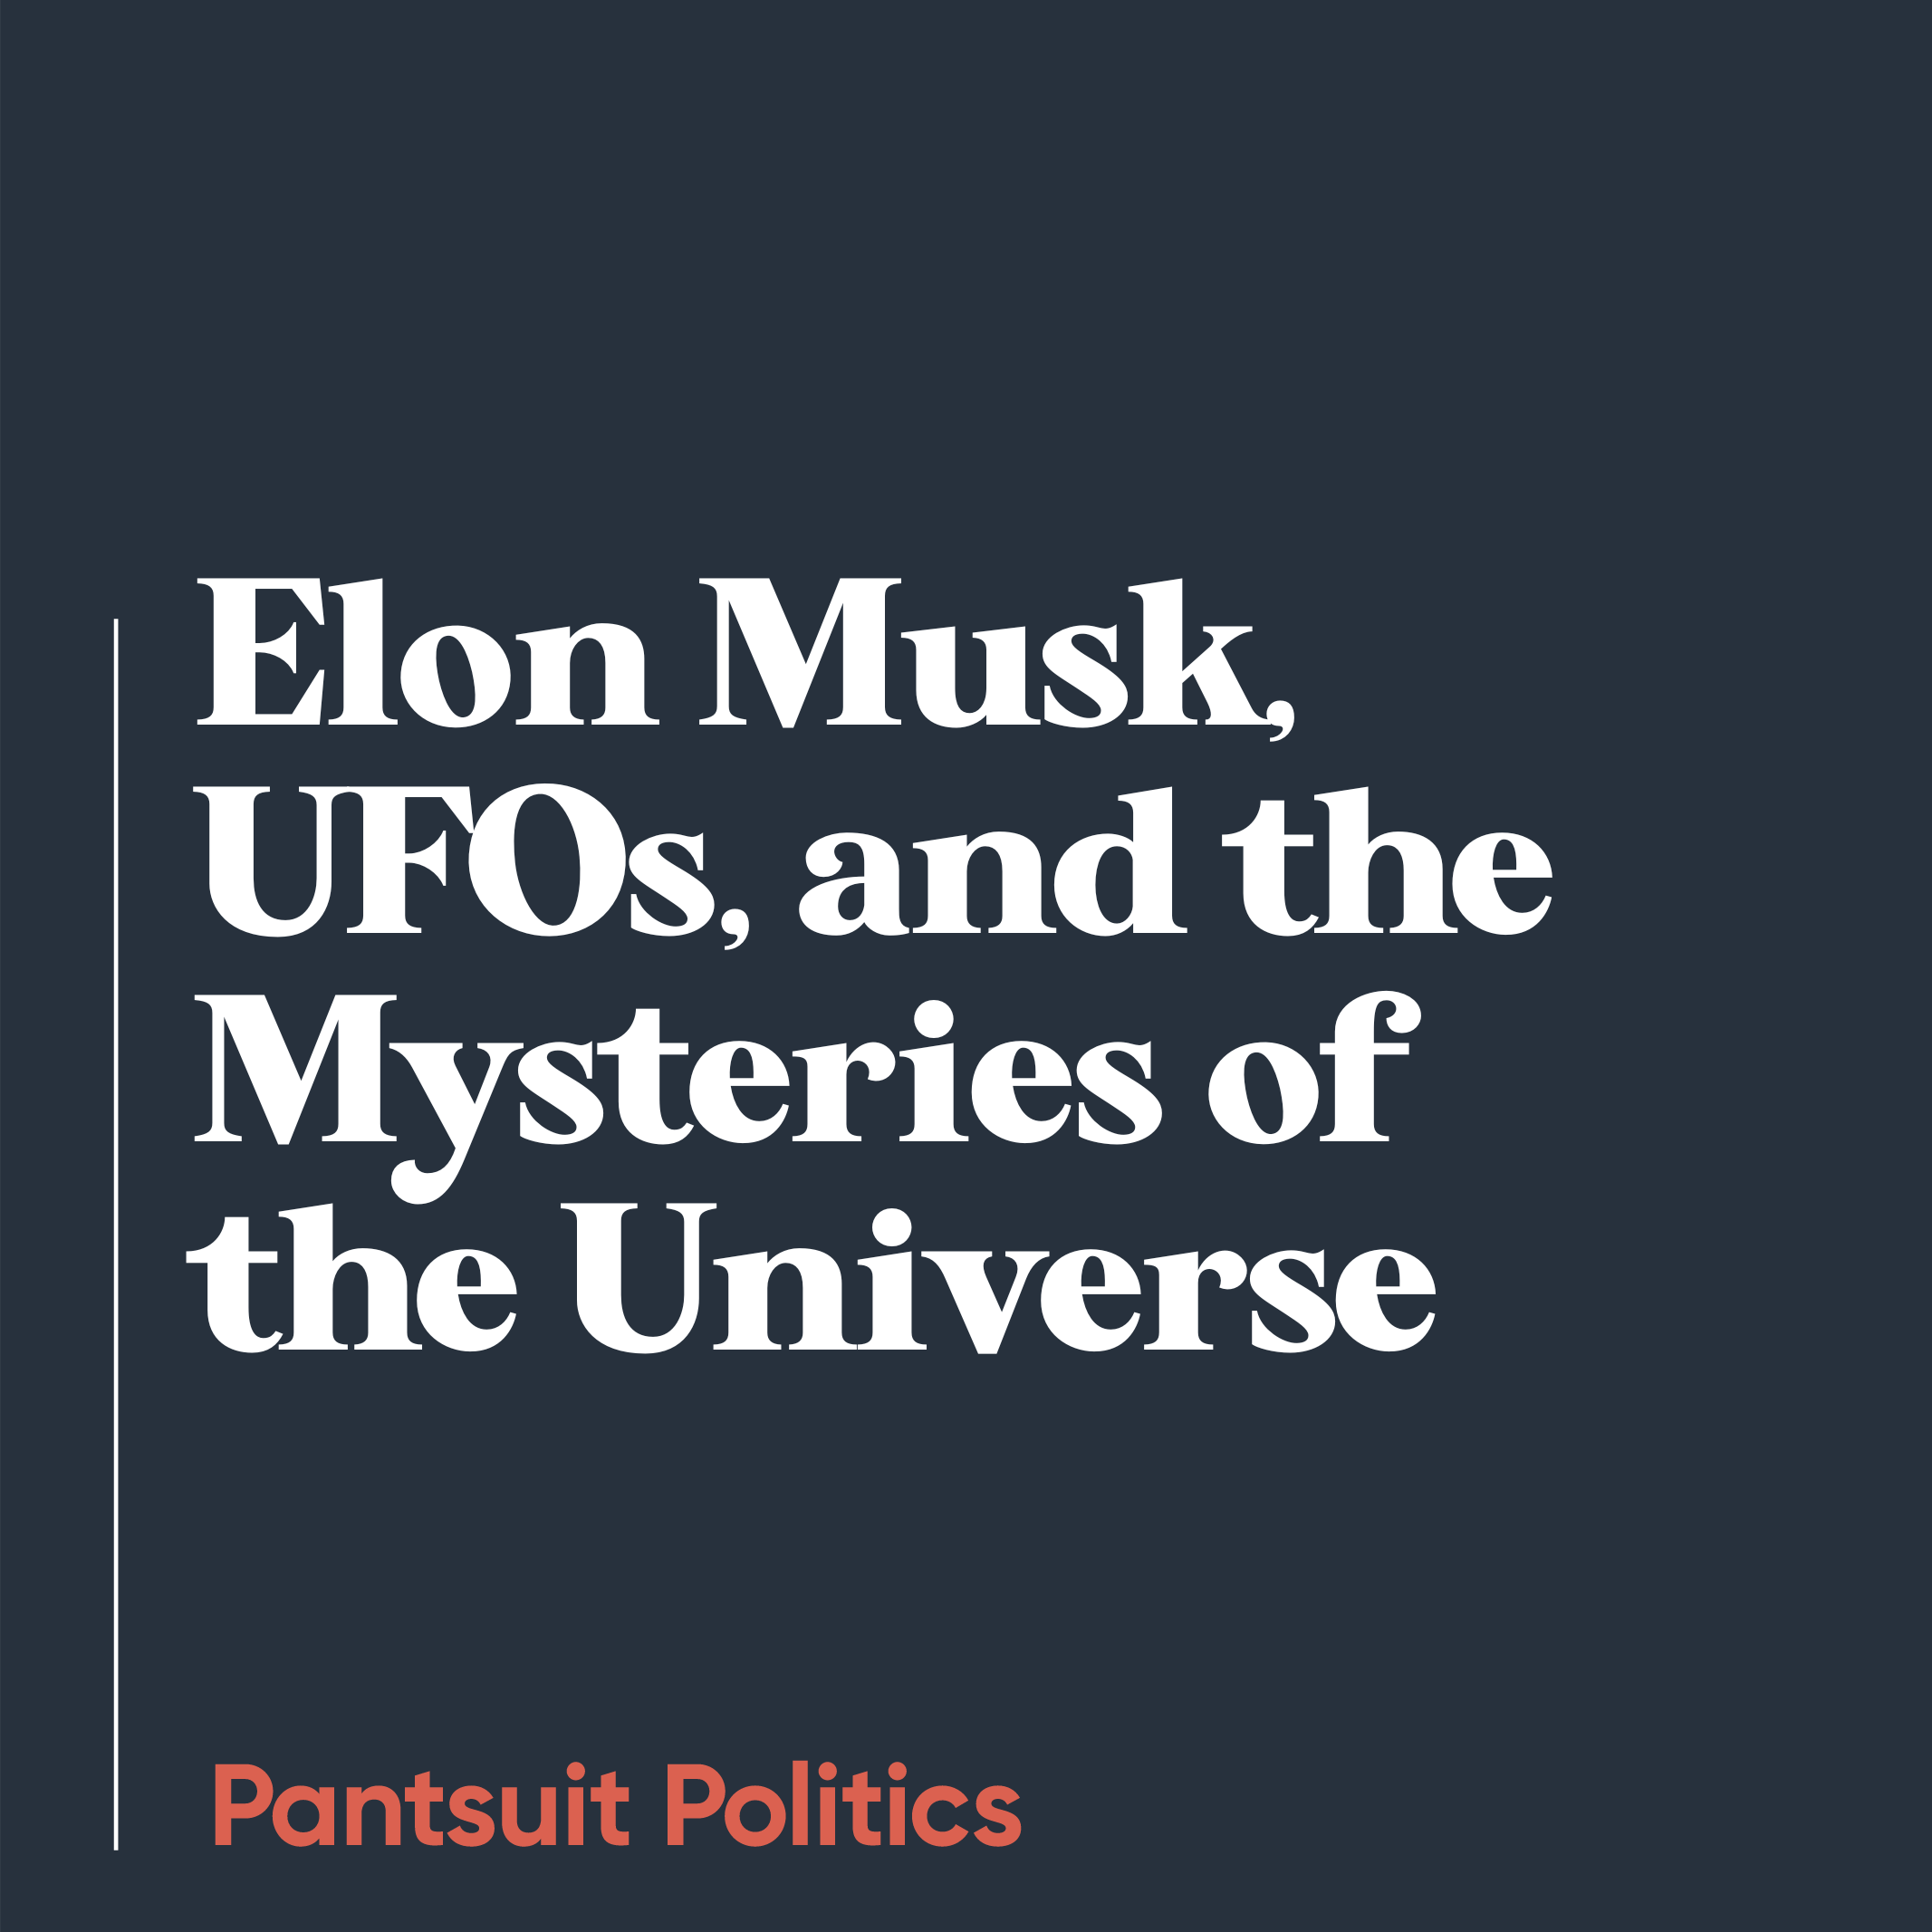 Elon Musk, UFOs, and the Mysteries of the Universe